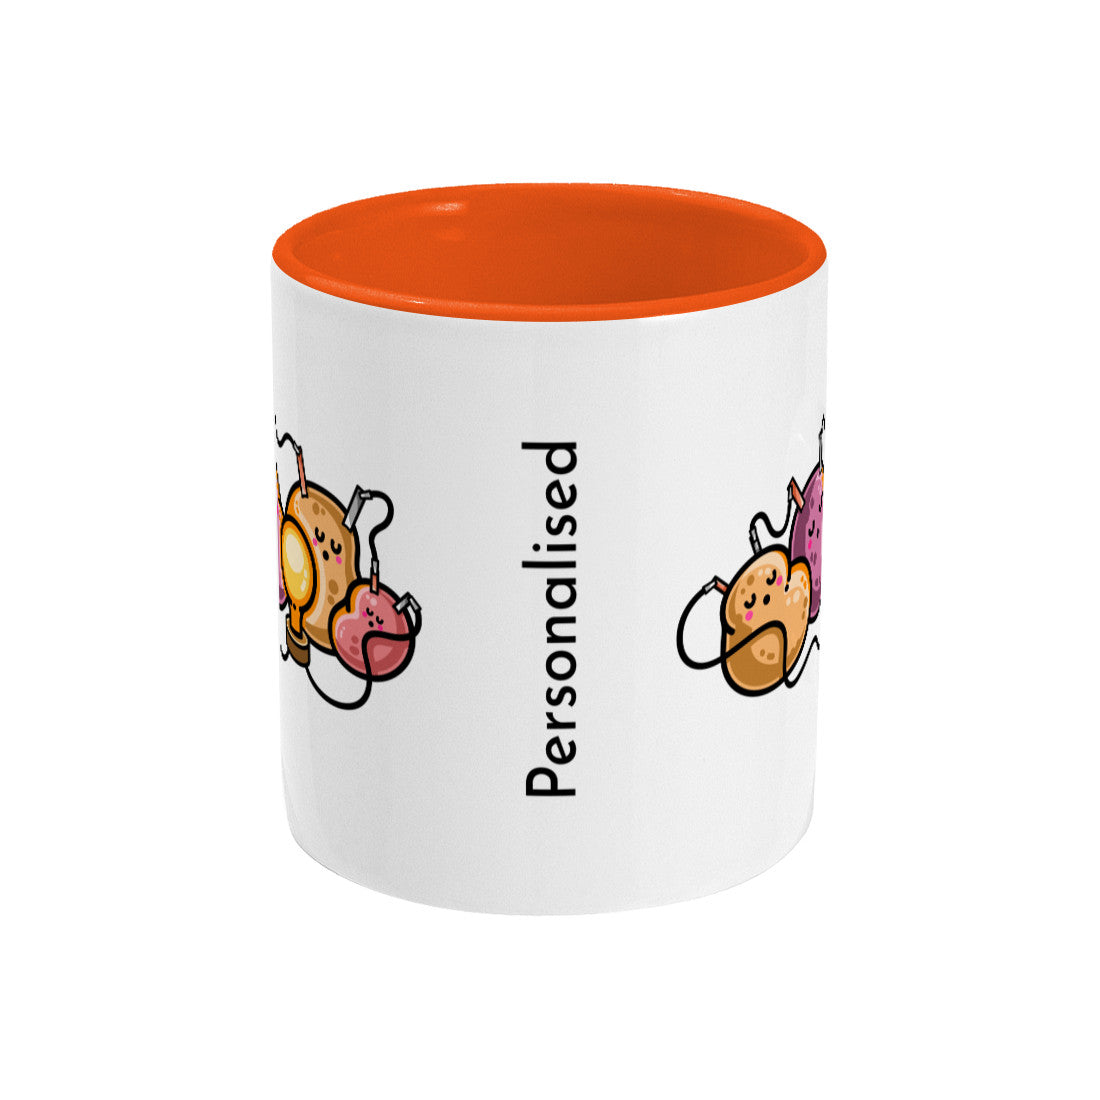 A two-toned white and orange ceramic mug, side view with handle around the back, the edges of the front and back designs showing and the word personalised printed vertically between.